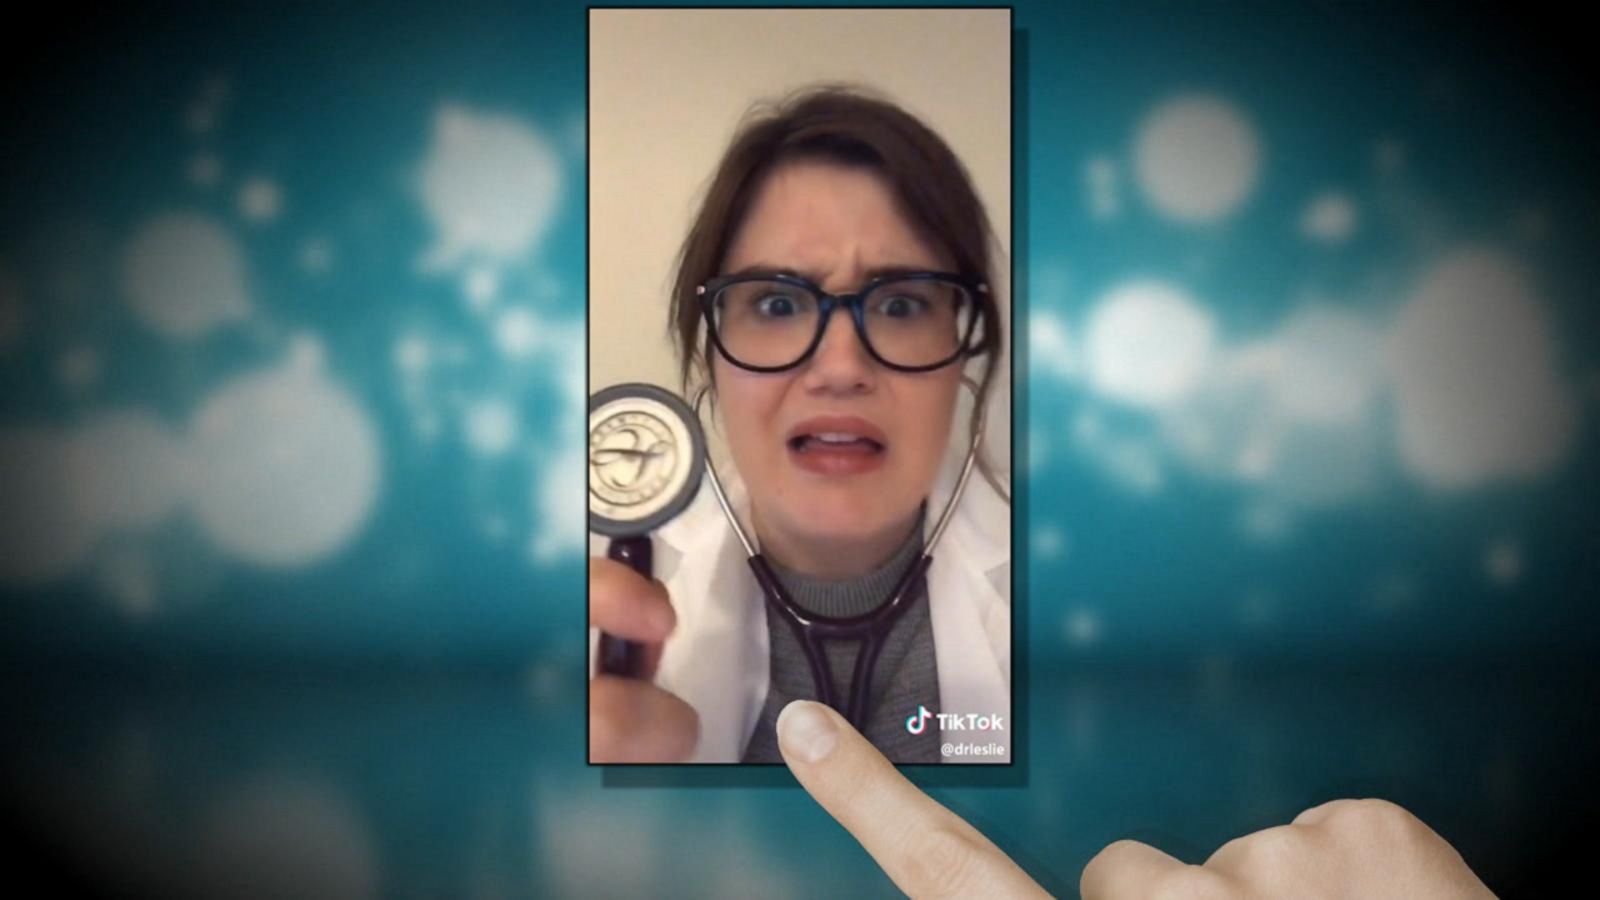 VIDEO: Millennial doctor uses TikTok to warn kids about the dangers of vaping